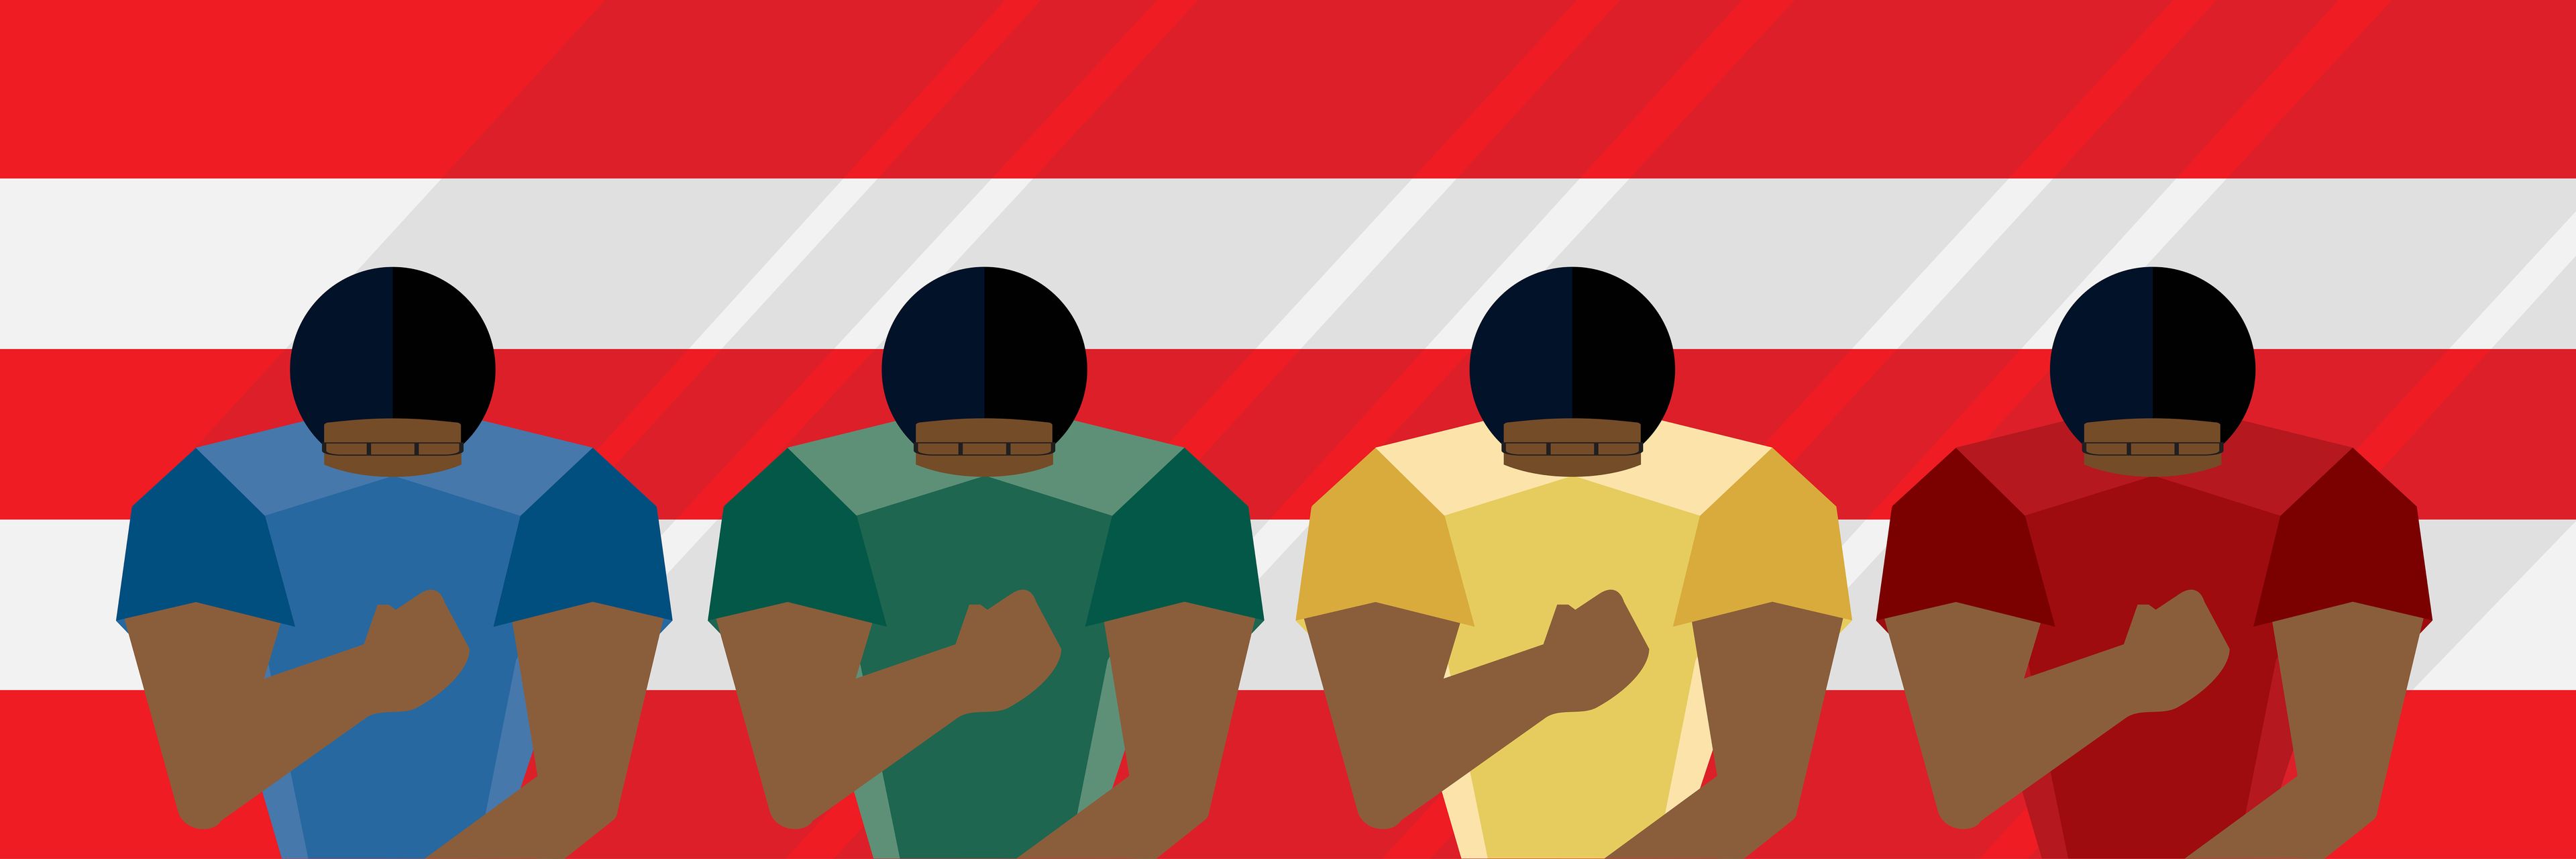 An illustration of four people in front of a flag, in a stance reminiscent of the popular 'taking the knee' protest from American Football games